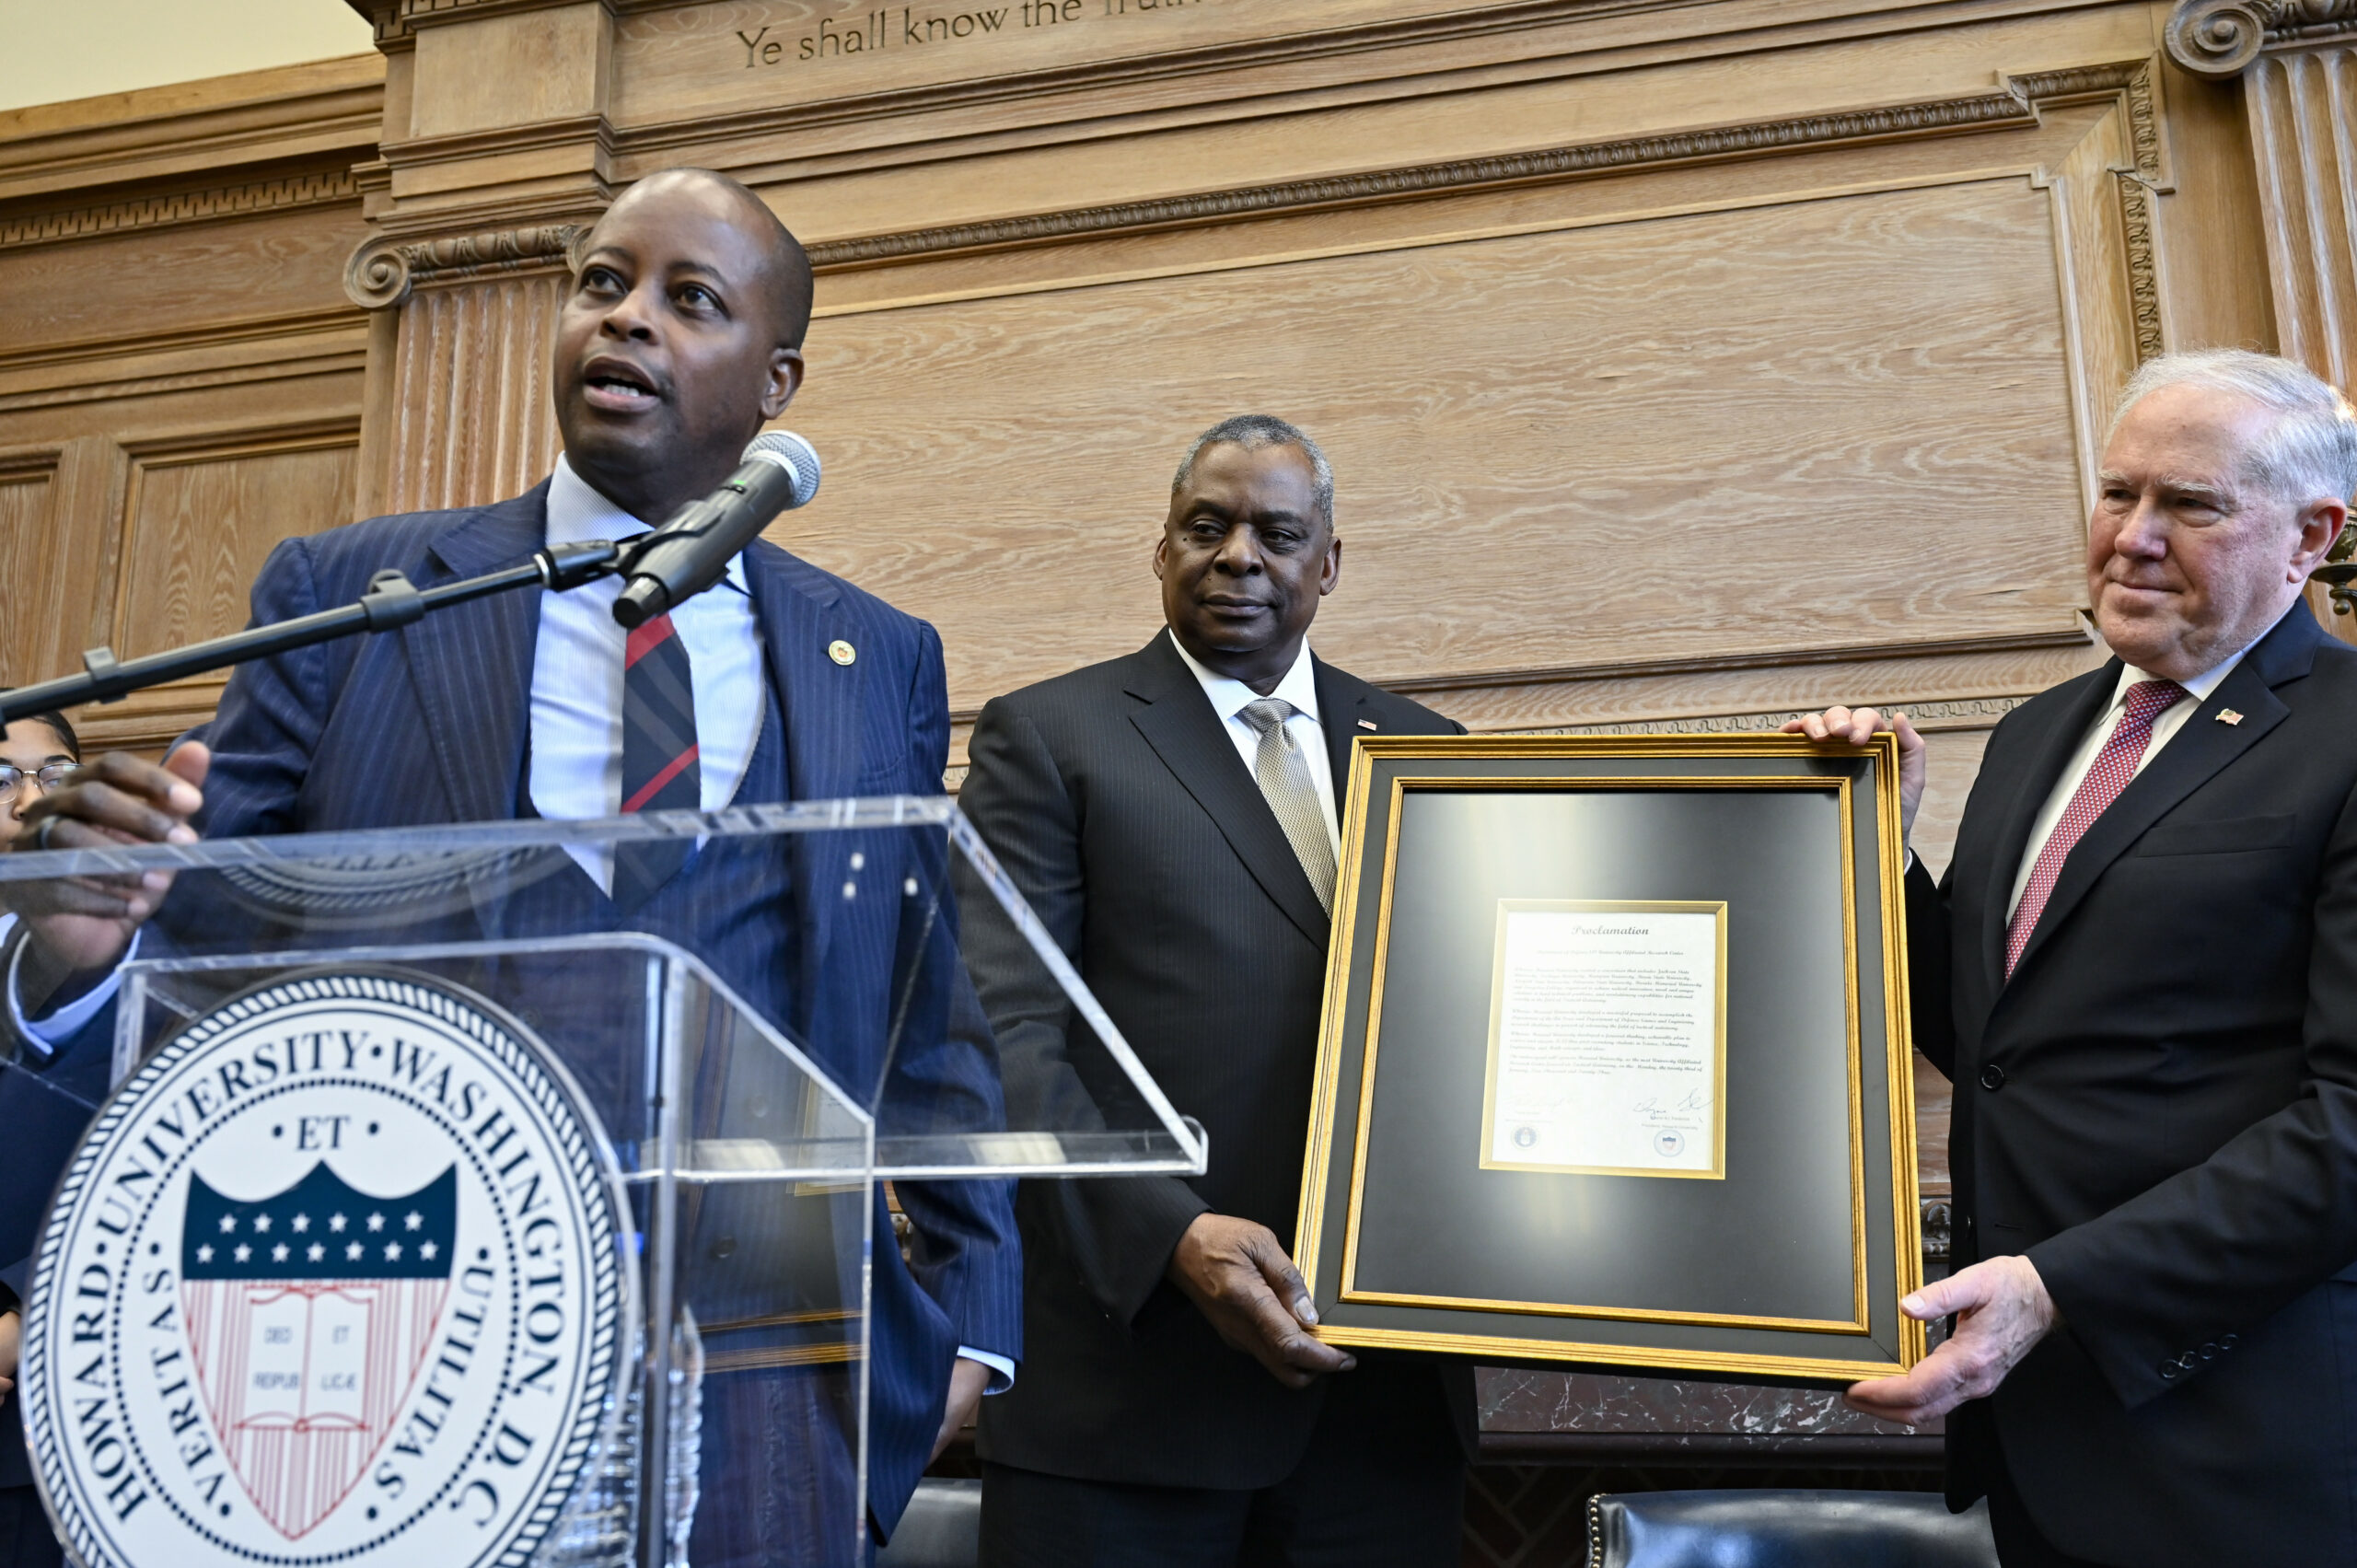 Howard University President Dr. Wayne Frederick, left, Secretary of Defense Lloyd Austin and Secretary of the Air Force Frank Kendall hold a proclamation announcing the partnership of Howard University as an Air Force university affiliated research center during a ceremony at the university in Washington, D.C., Jan. 23, 2023. (U.S. Air Force photo by Eric Dietrich)